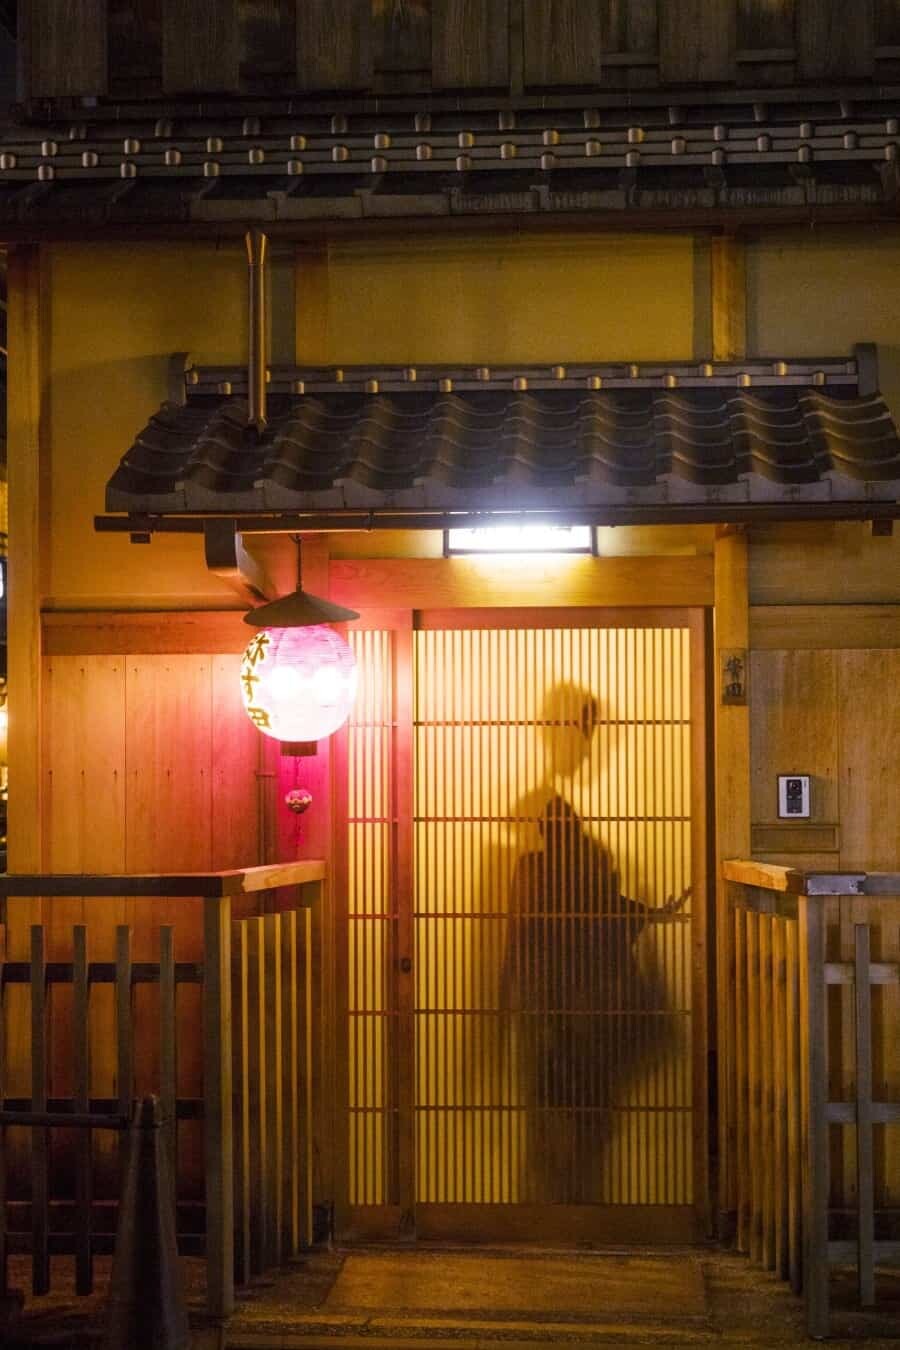 Kyoto Photography Locations, Japan travel guide by The Wandering Lens